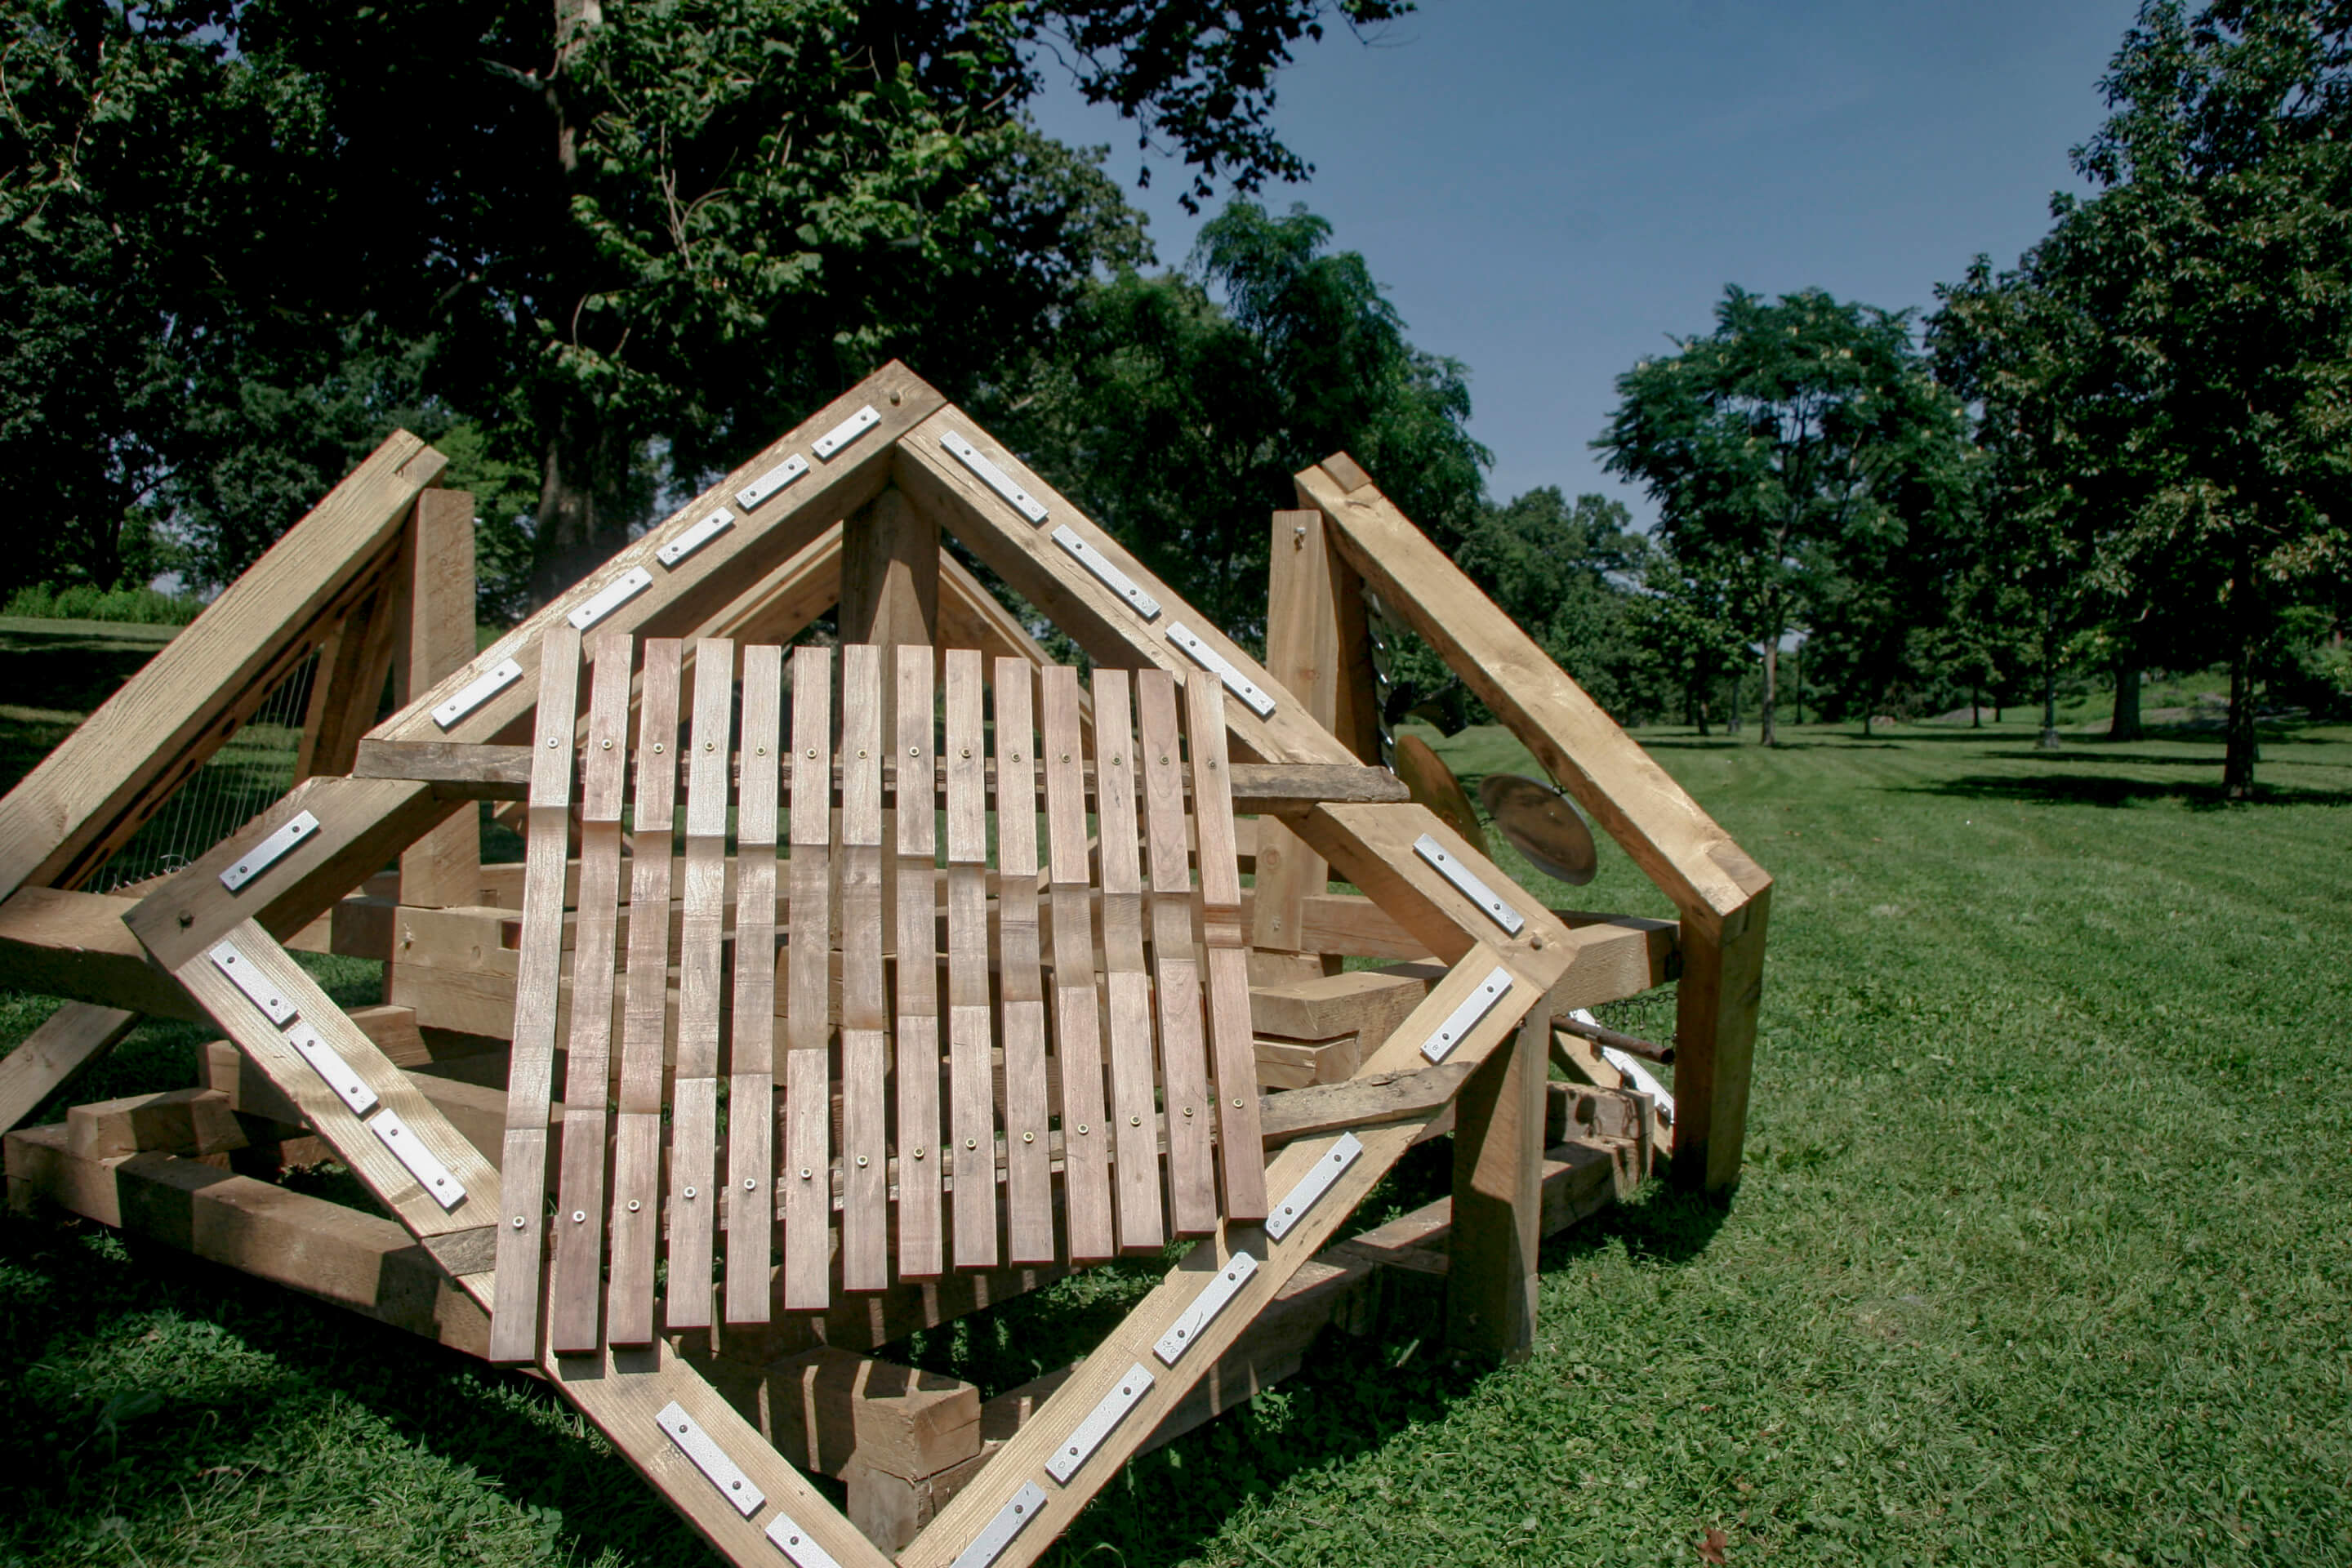 The wooden frame and xylophone of beam ensemble in a park